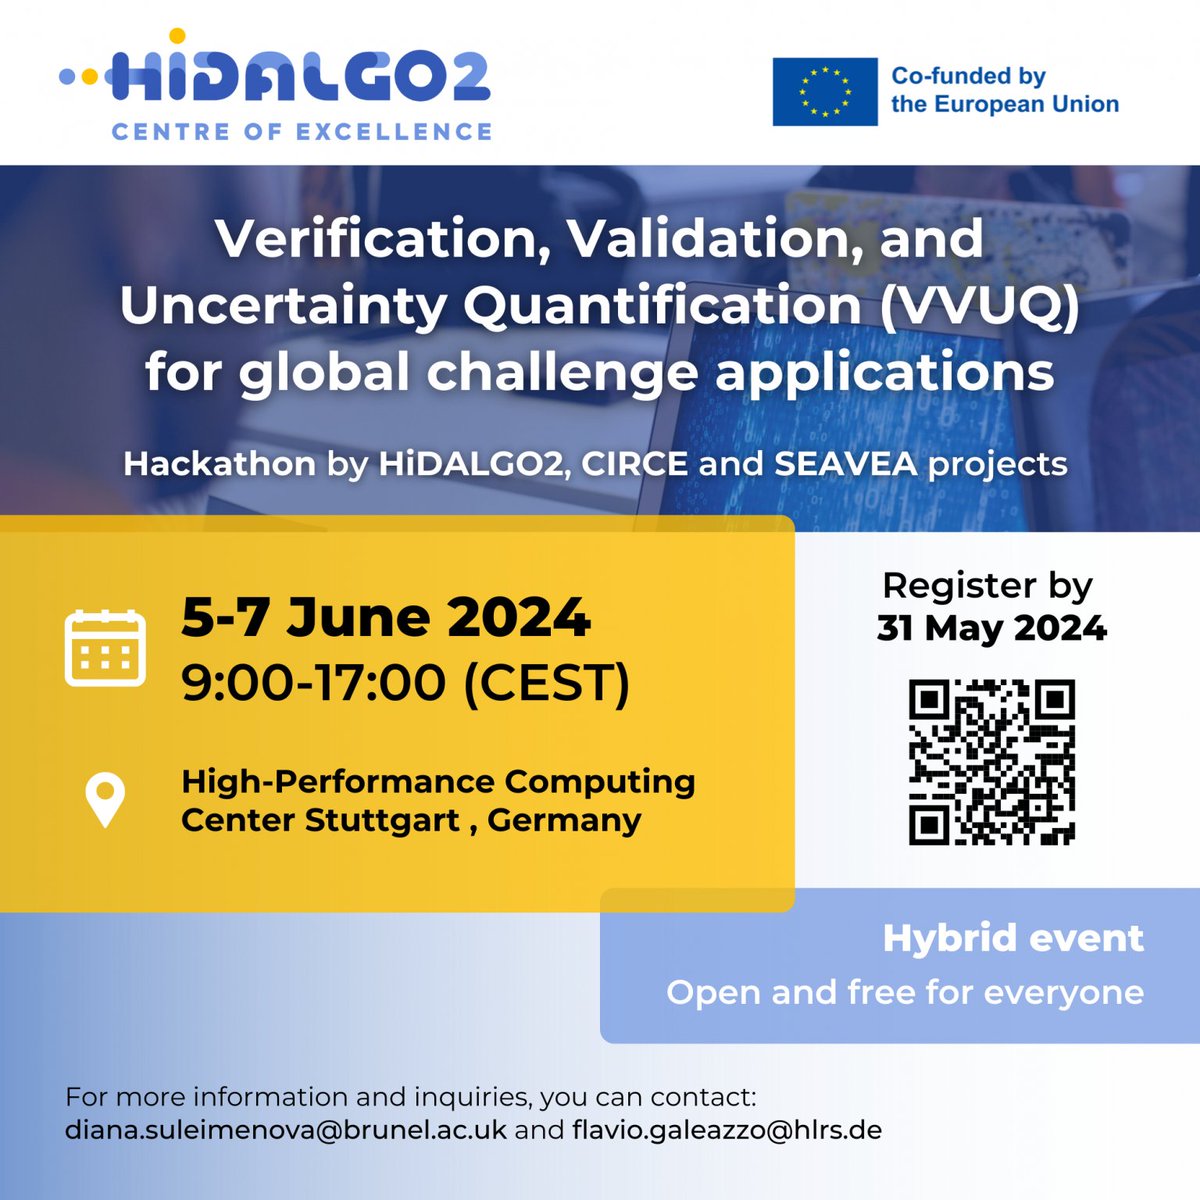 The @EuroHPC_JU project HiDALGO2 is organising a Hackathon.

This is the opportunity to dive into Verification, Validation & Uncertainty Quantification (VVUQ) for global challenge applications using the SEAVEA toolkit
📅5-7 June 2024

Deadline: 31 May 2024 forms.gle/4ytFD4TNEWFcA3…